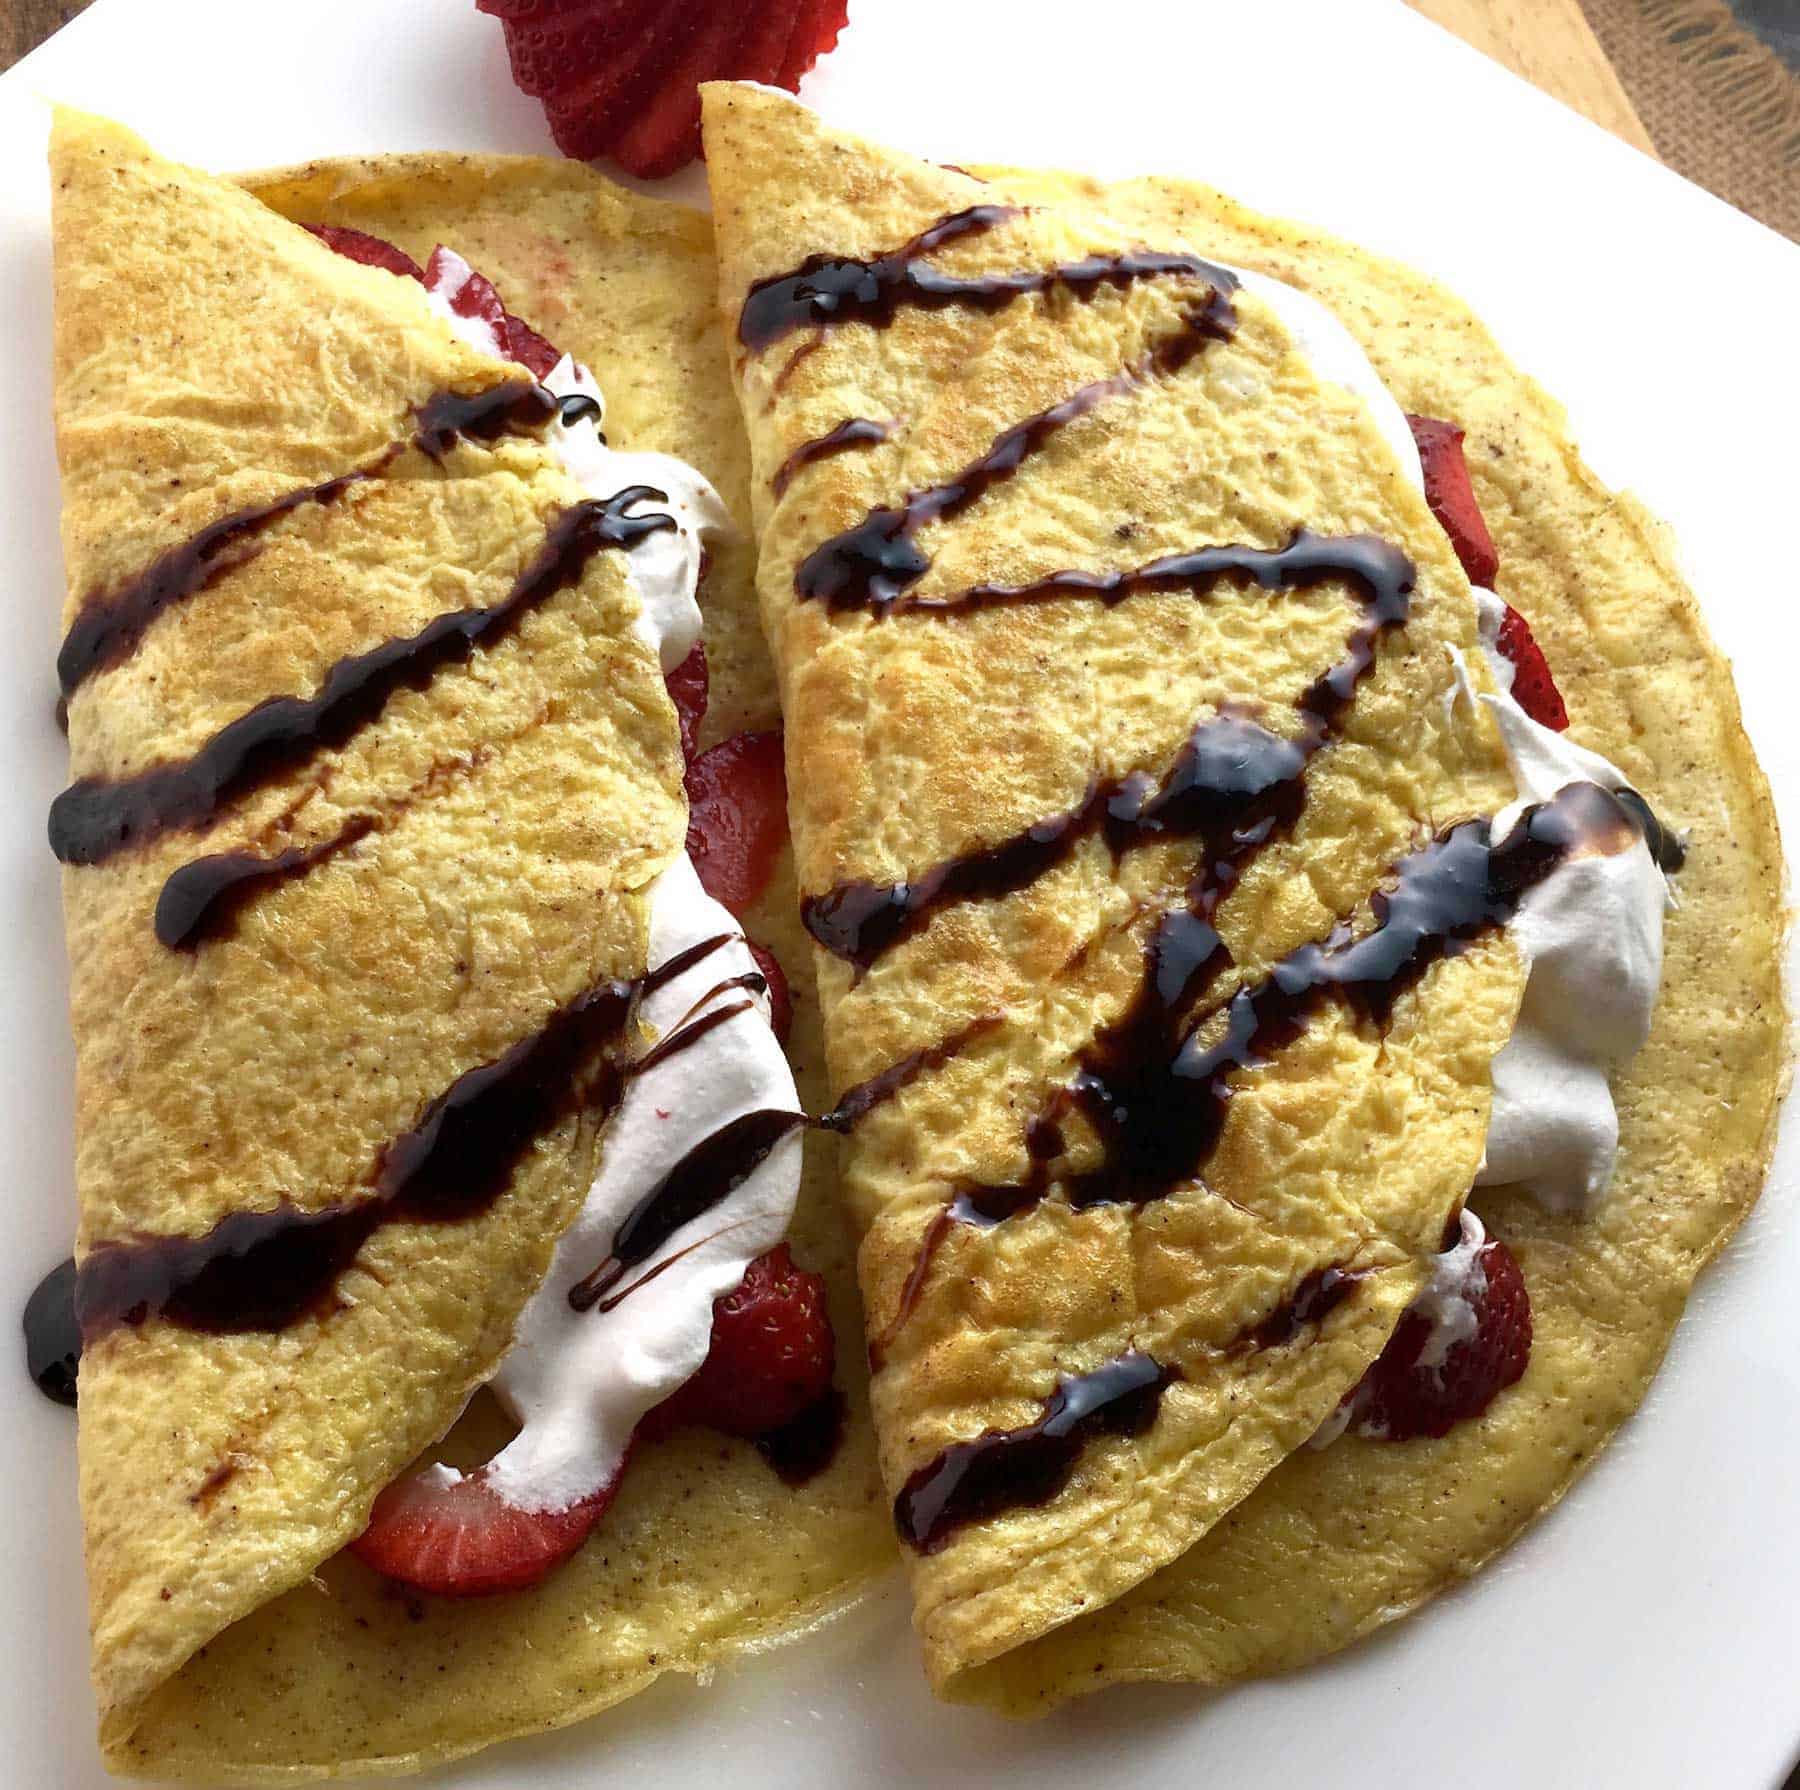 These gluten free flourless crepes are delicious wrapped around fresh strawberries and drizzled with a maple whipped cream!